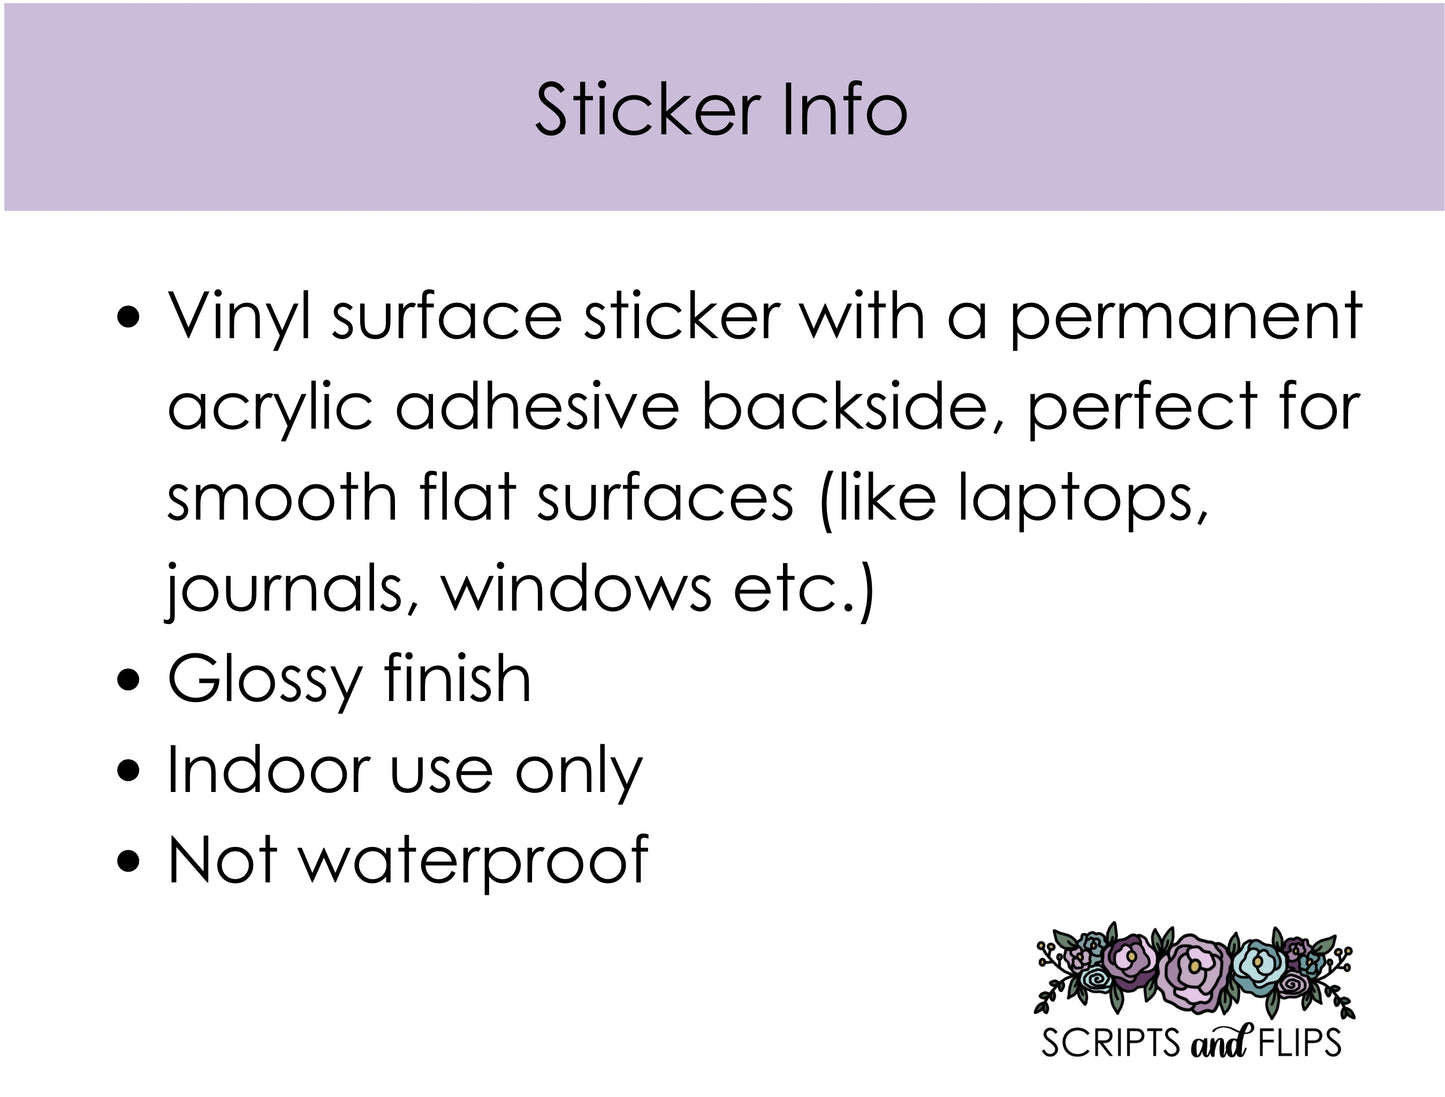 Vinyl surface sticker with a permanent acrylic adhesive backside, perfect for smooth flat surfaces (like laptops, journals, windows etc.) Glossy finish Indoor use only Not waterproof